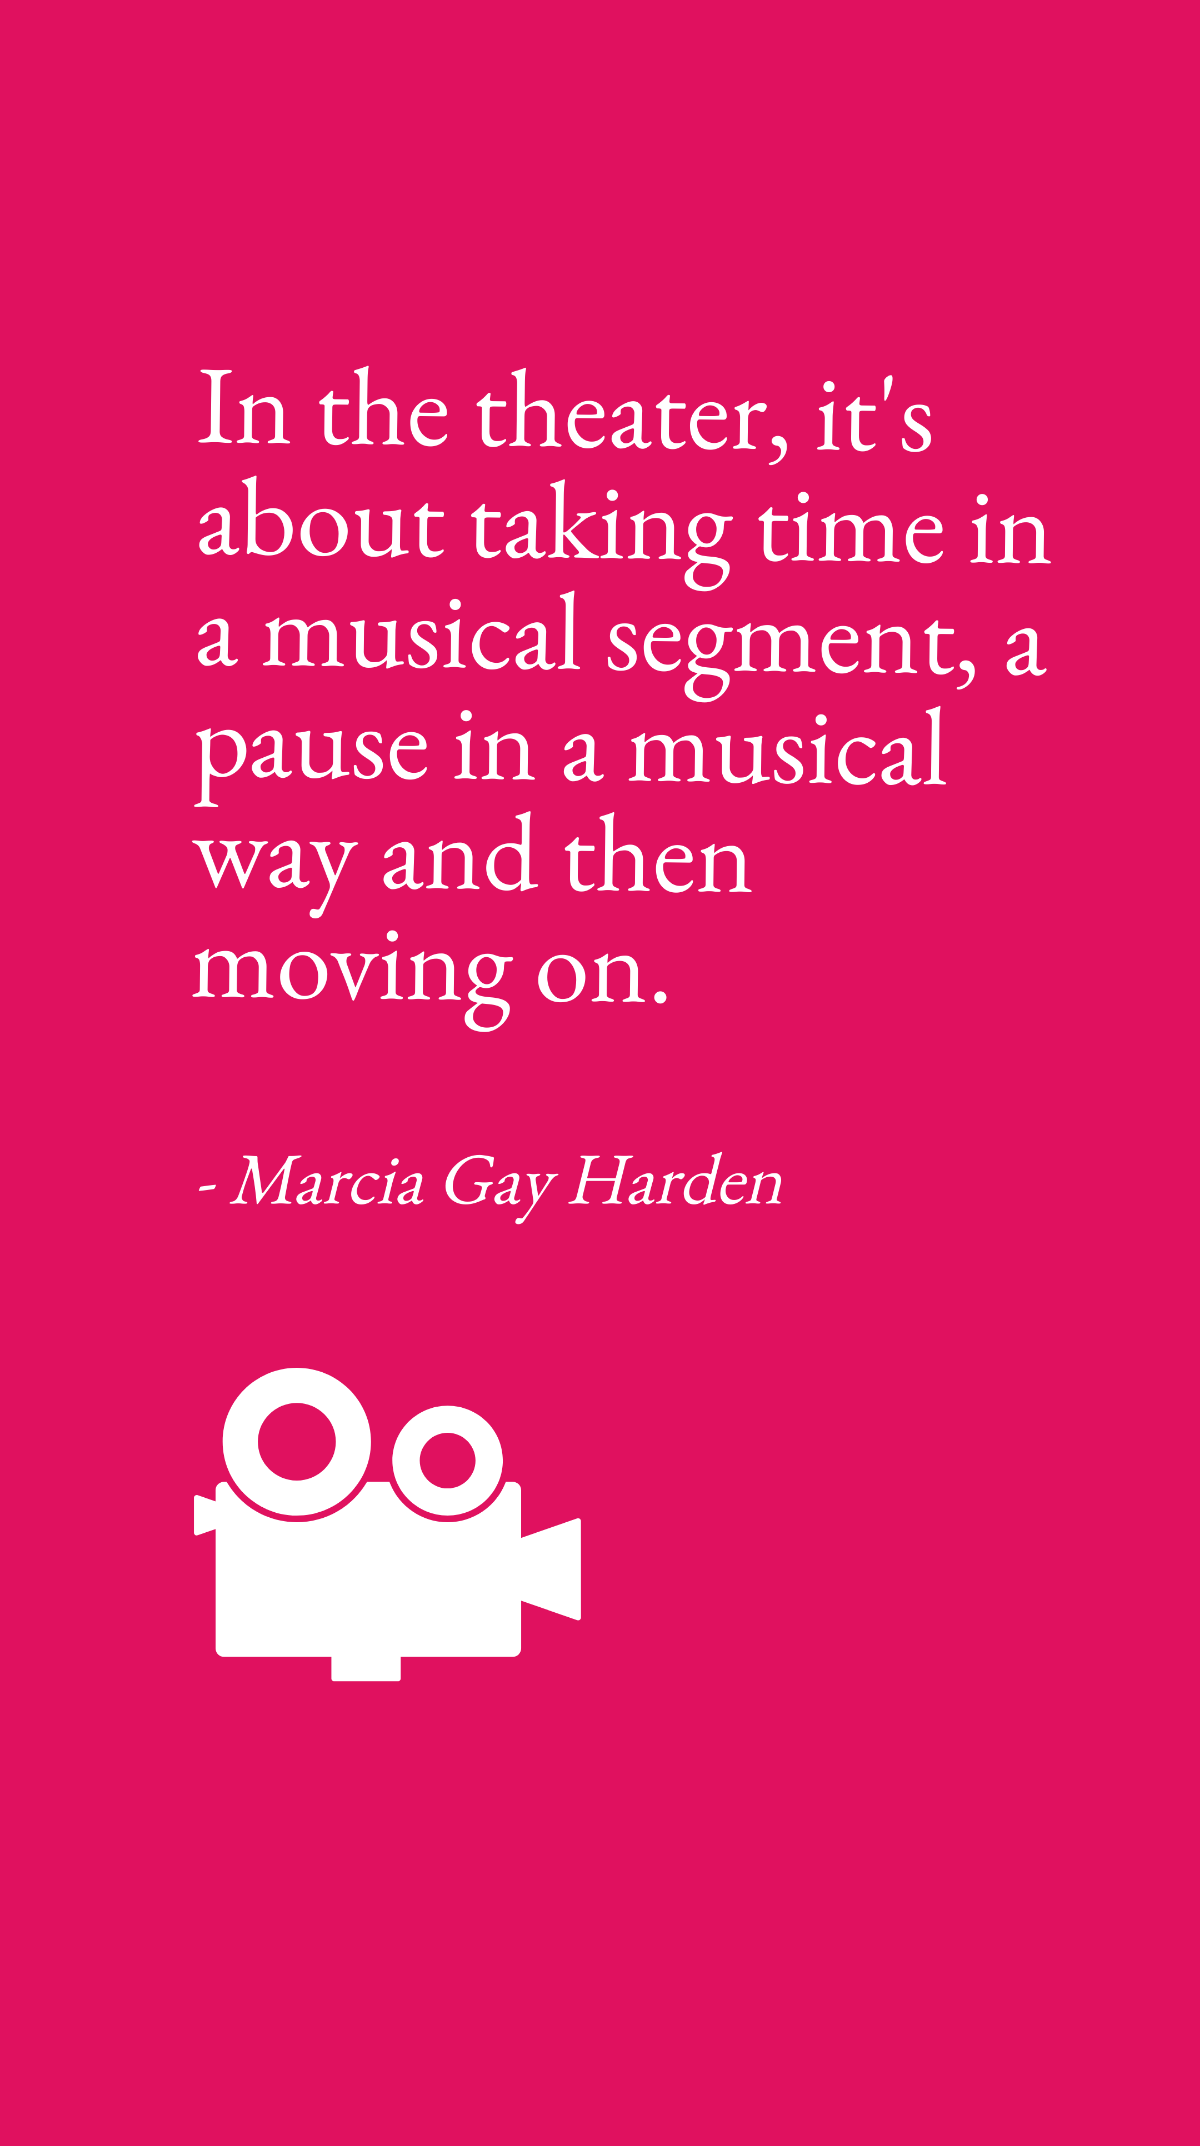 Marcia Gay Harden -In the theater, it's about taking time in a musical segment, a pause in a musical way and then moving on. Template